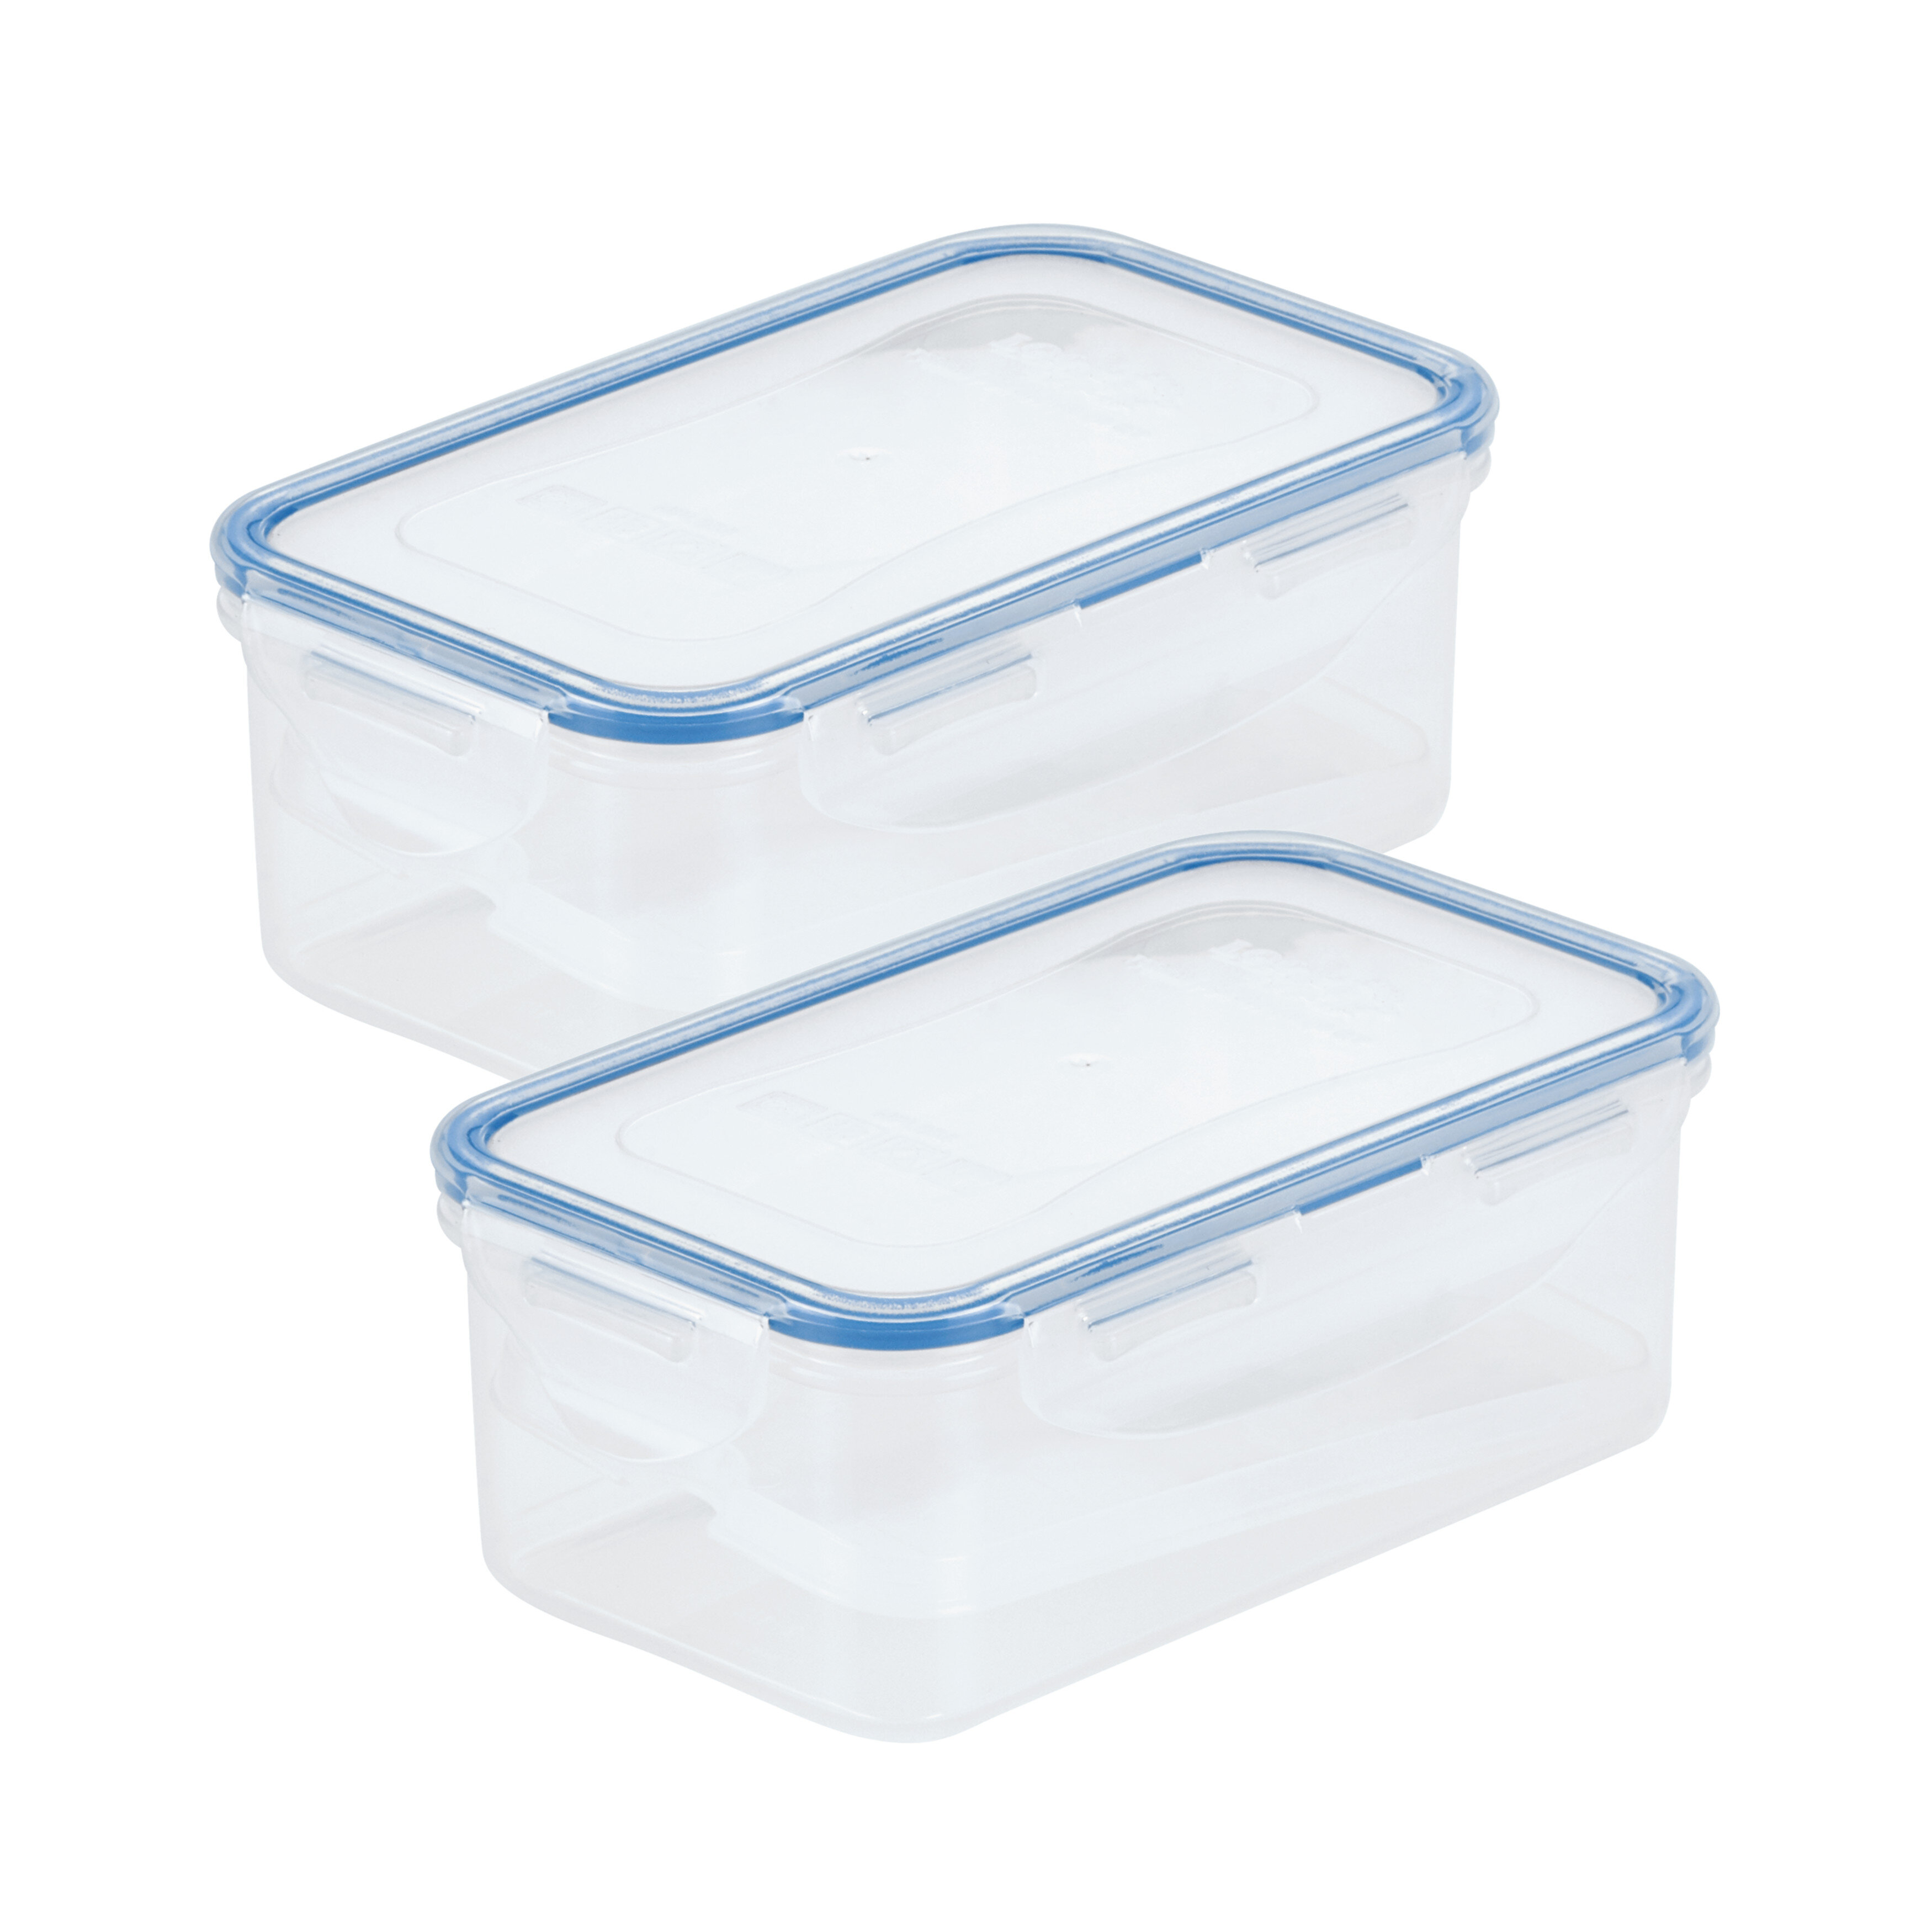 LocknLock Specialty Butter and Cheese 2 Container Food Storage Set